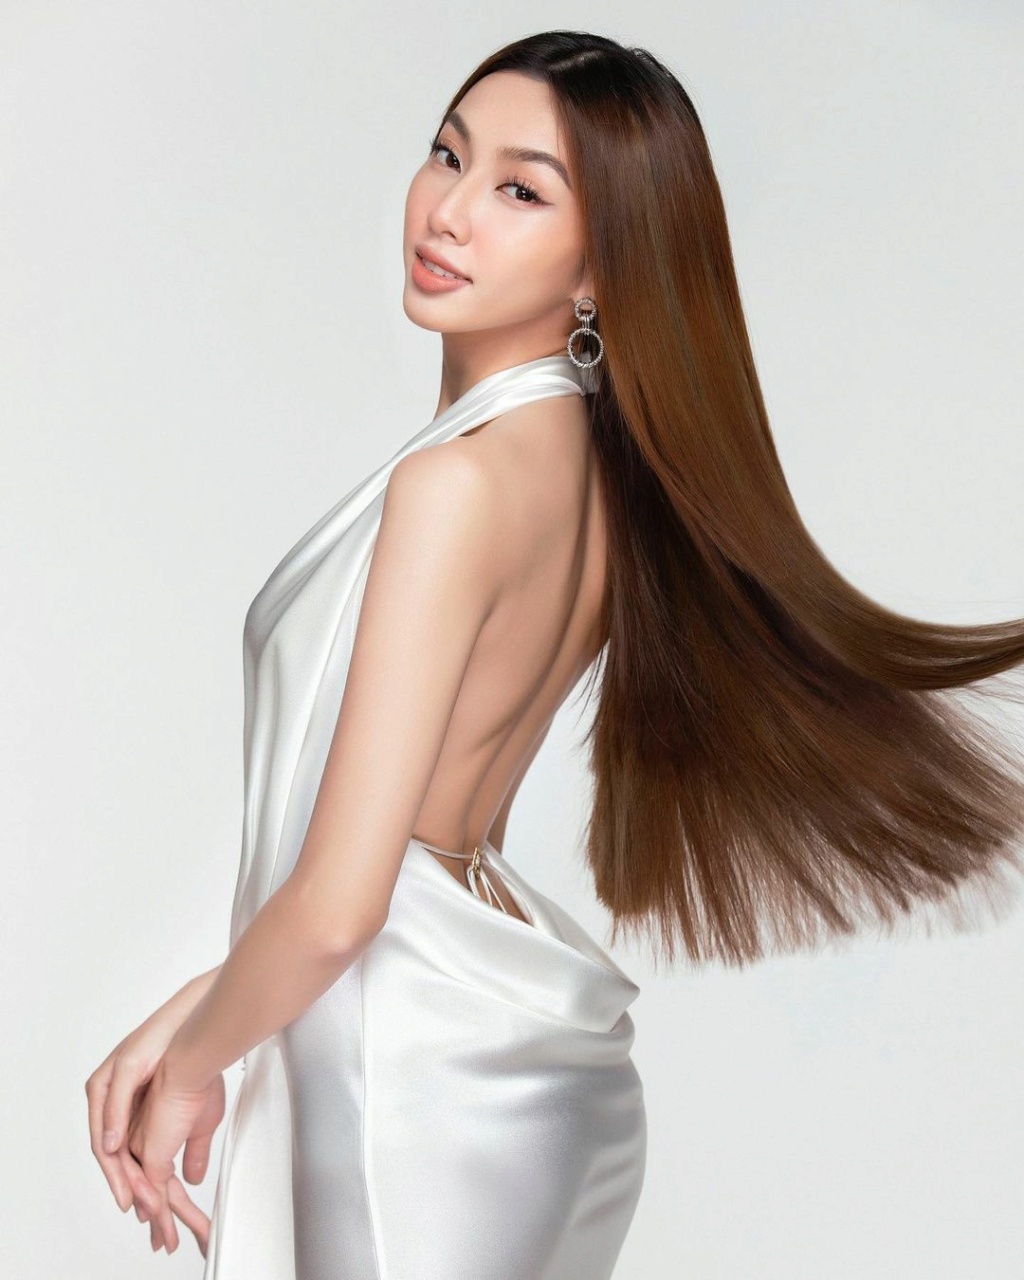 The Official Thread Of MISS GRAND INTERNATIONAL 2021 : NGUYỄN THÚC THUỲ TIÊN From VIETNAM - Page 3 27324010